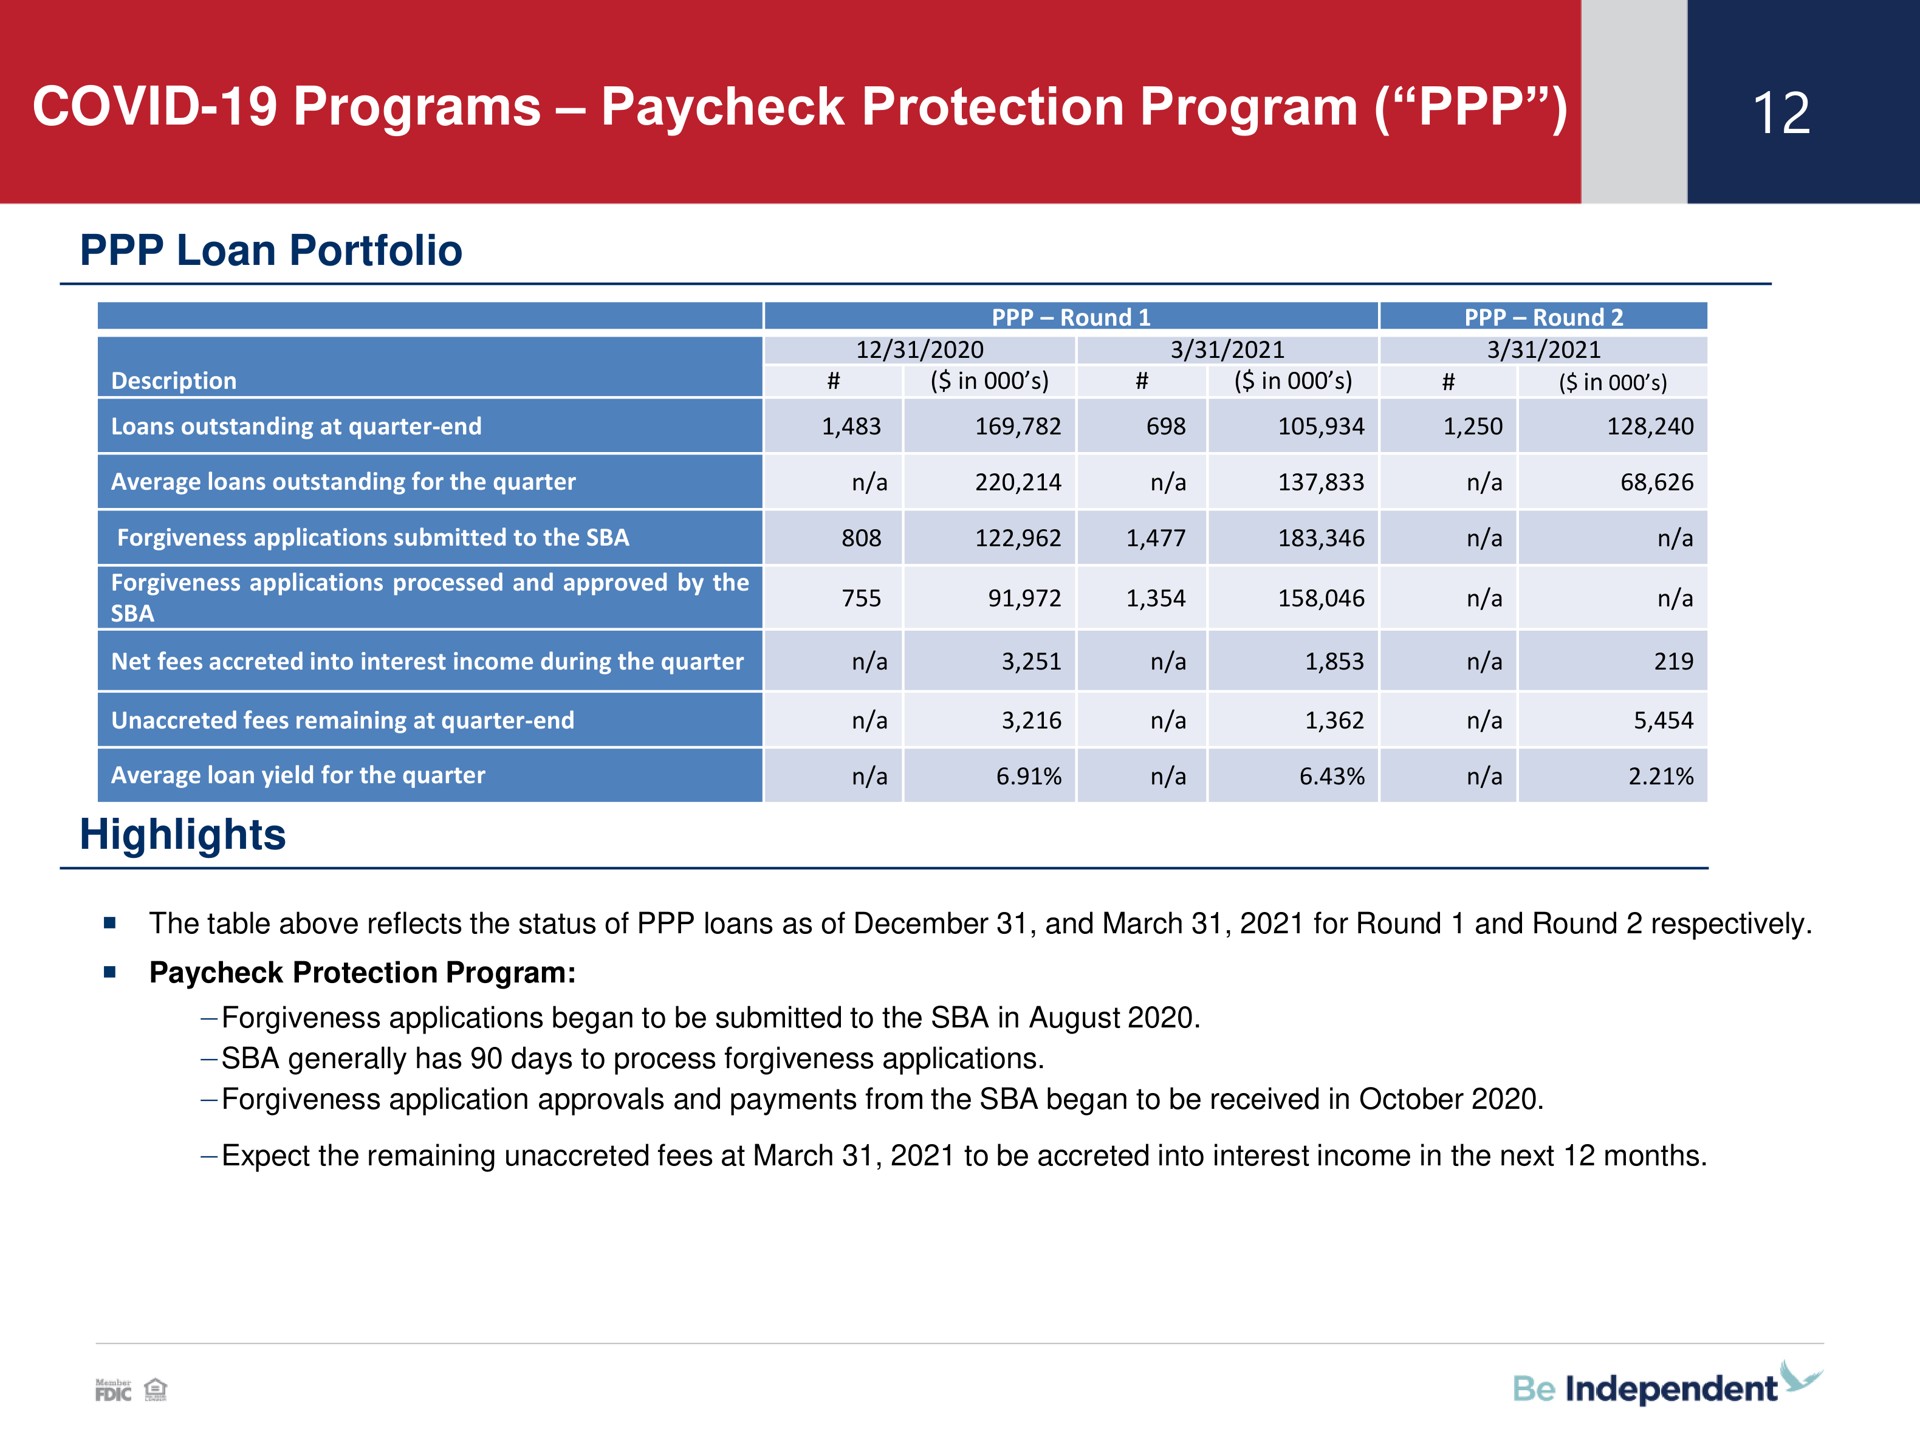 covid programs protection program highlights | Independent Bank Corp